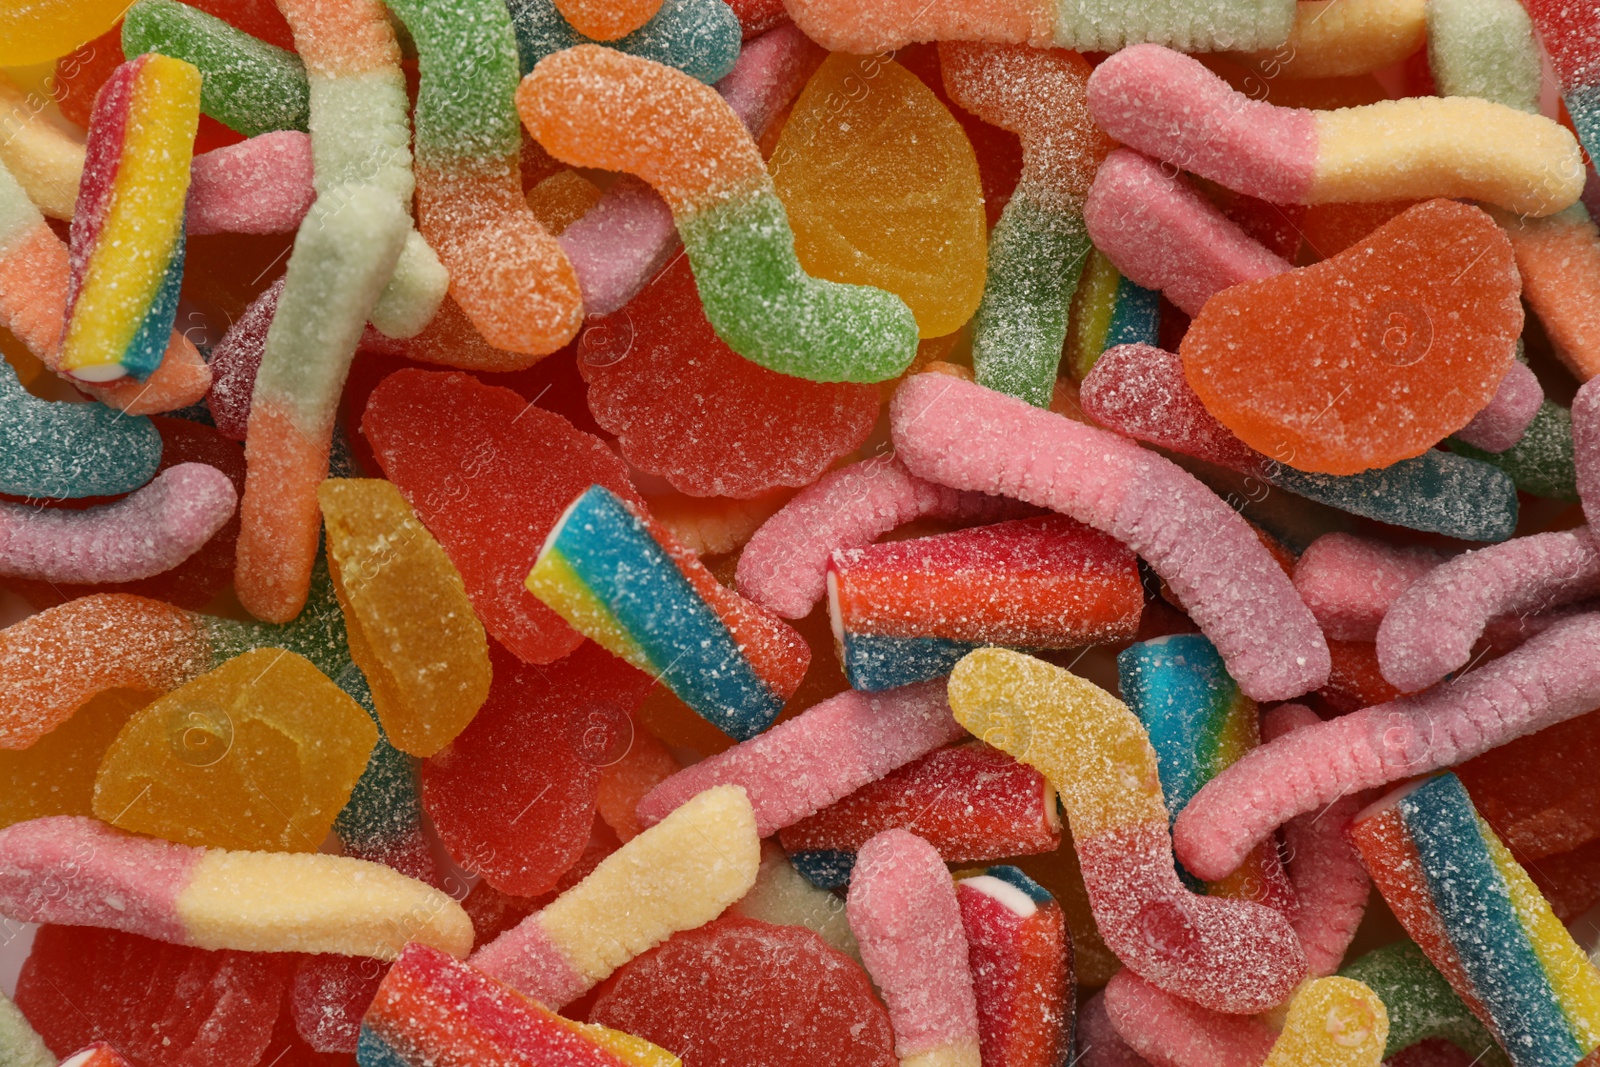 Photo of Many different tasty jelly candies as background, top view